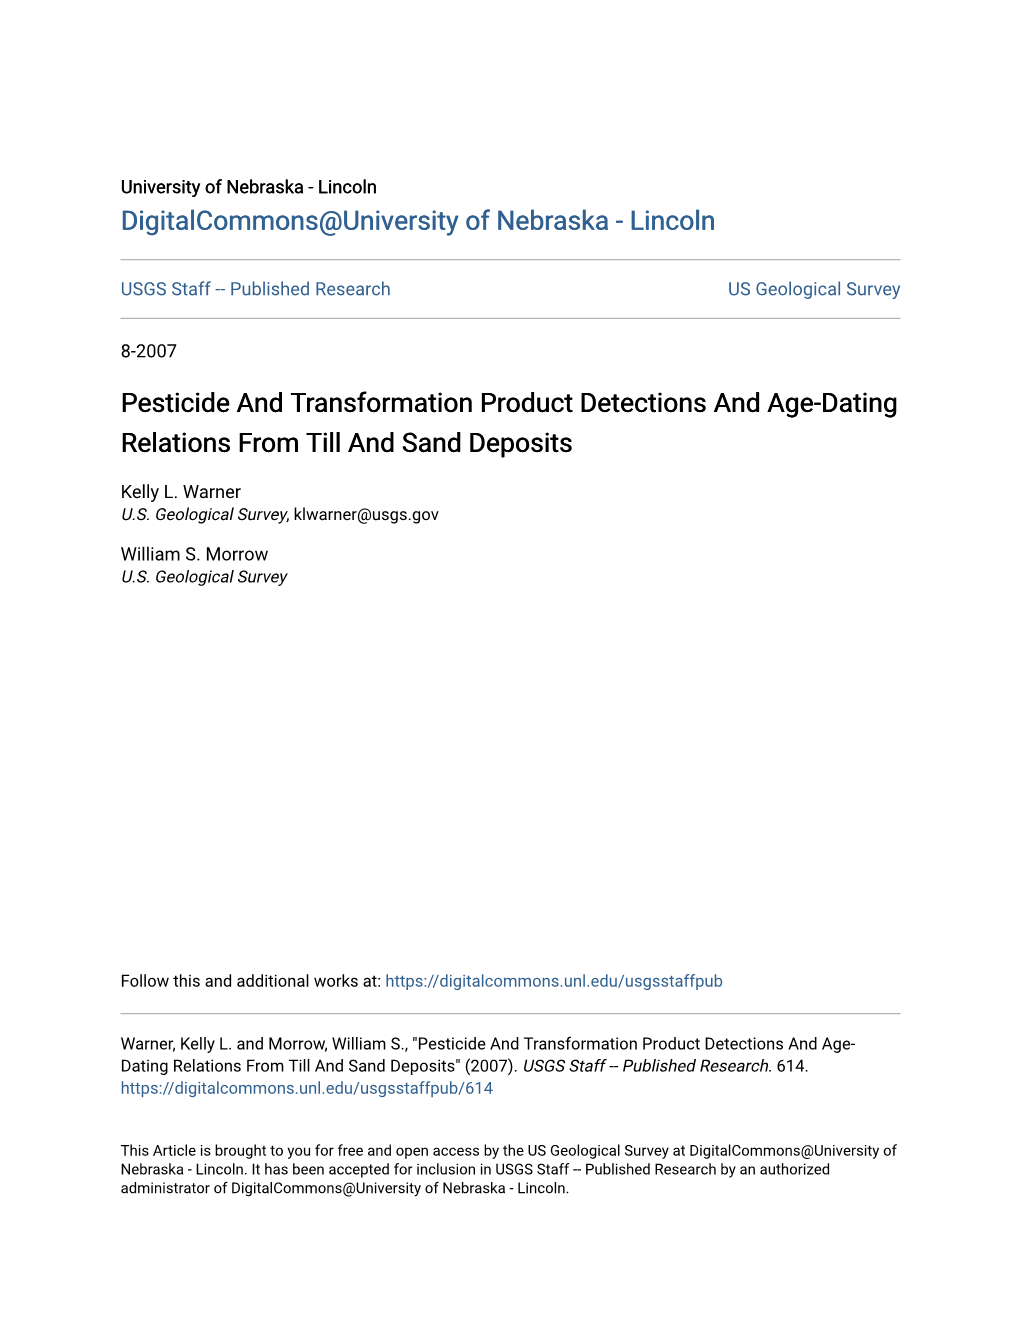 Pesticide and Transformation Product Detections and Age-Dating Relations from Till and Sand Deposits